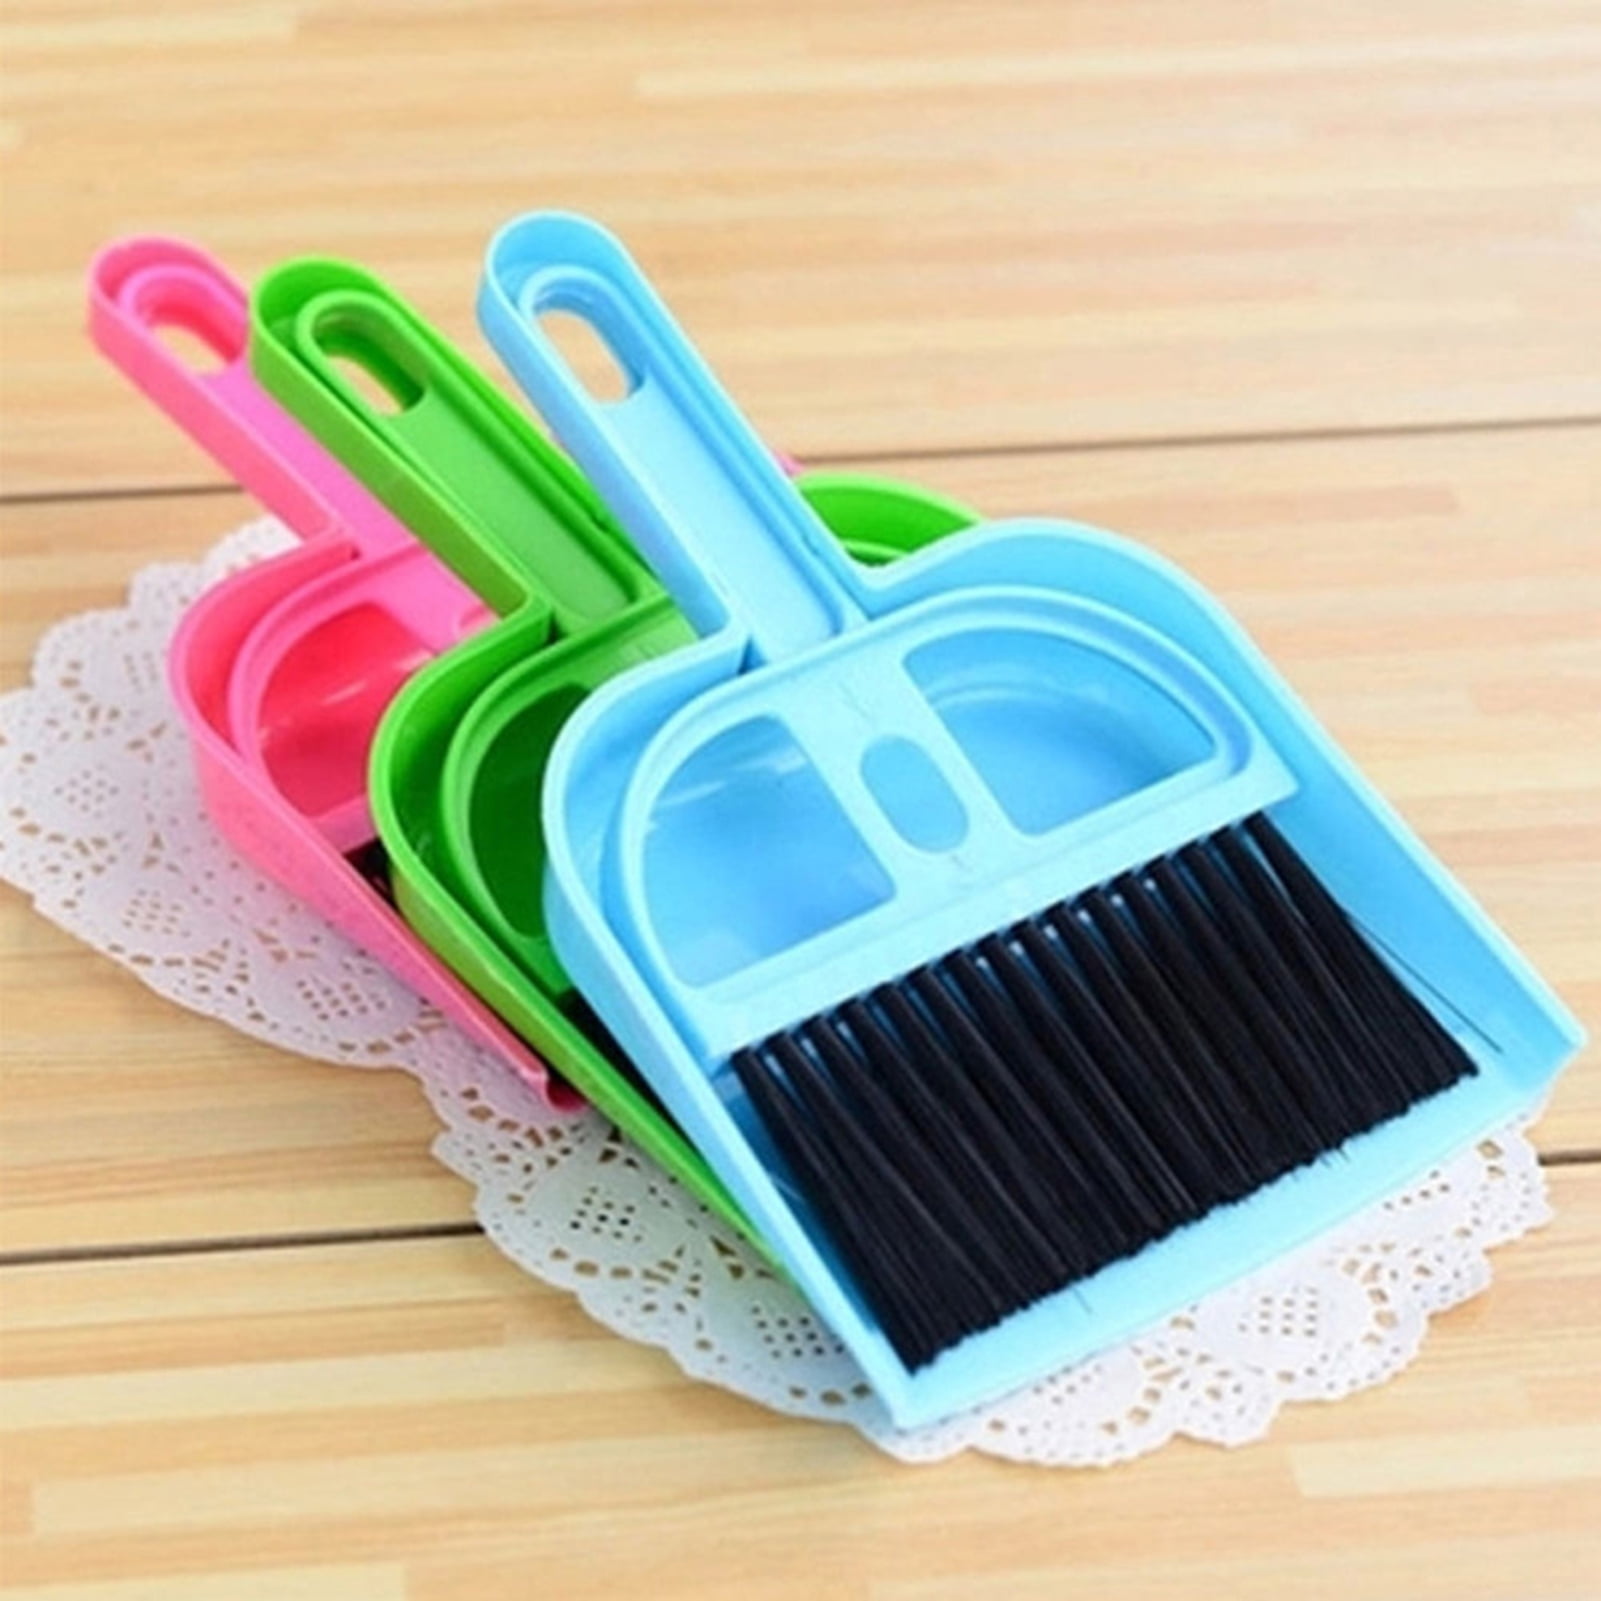 Mini Dustpan and Brush Set Small Hand Broom Dustpan Set Handy Dustpan and  Brush Set Mini Whisk Set Household Cleaning Tool for Table, Desk,  Countertop, Keyboard, Sofa (Blue) - by Viemira 